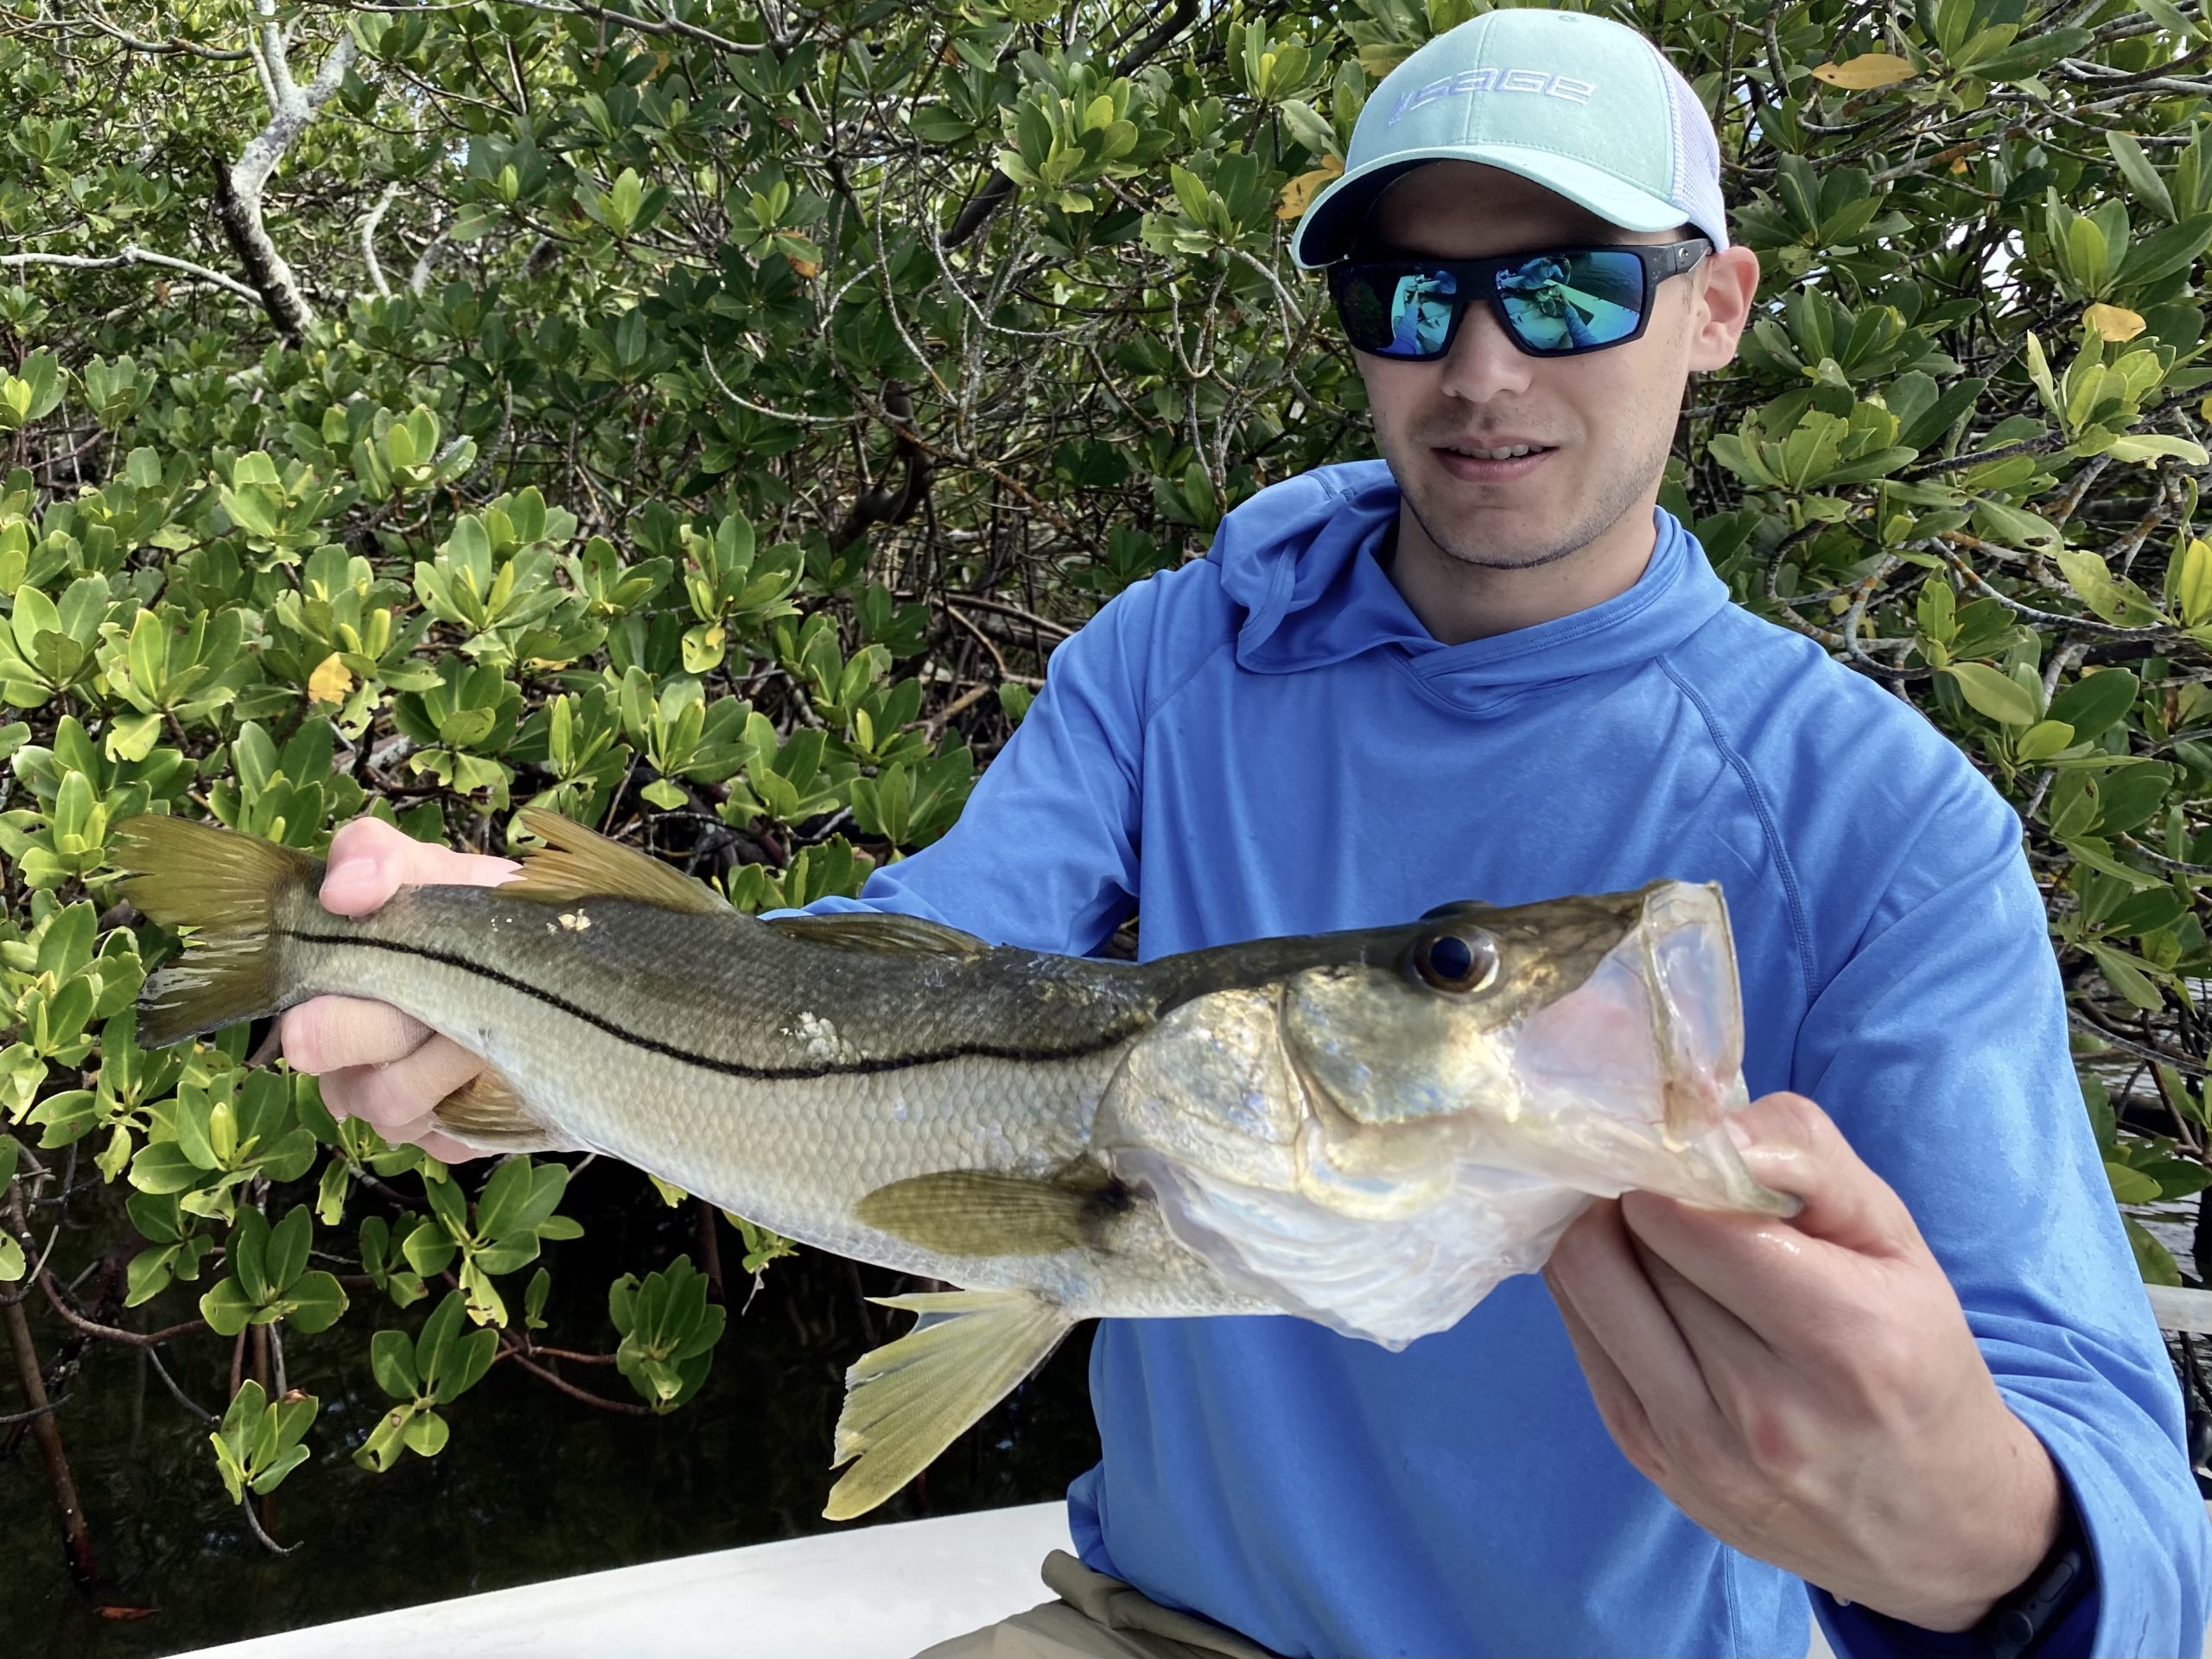 An angler holds a fat snook caught while fly fishing in the back country